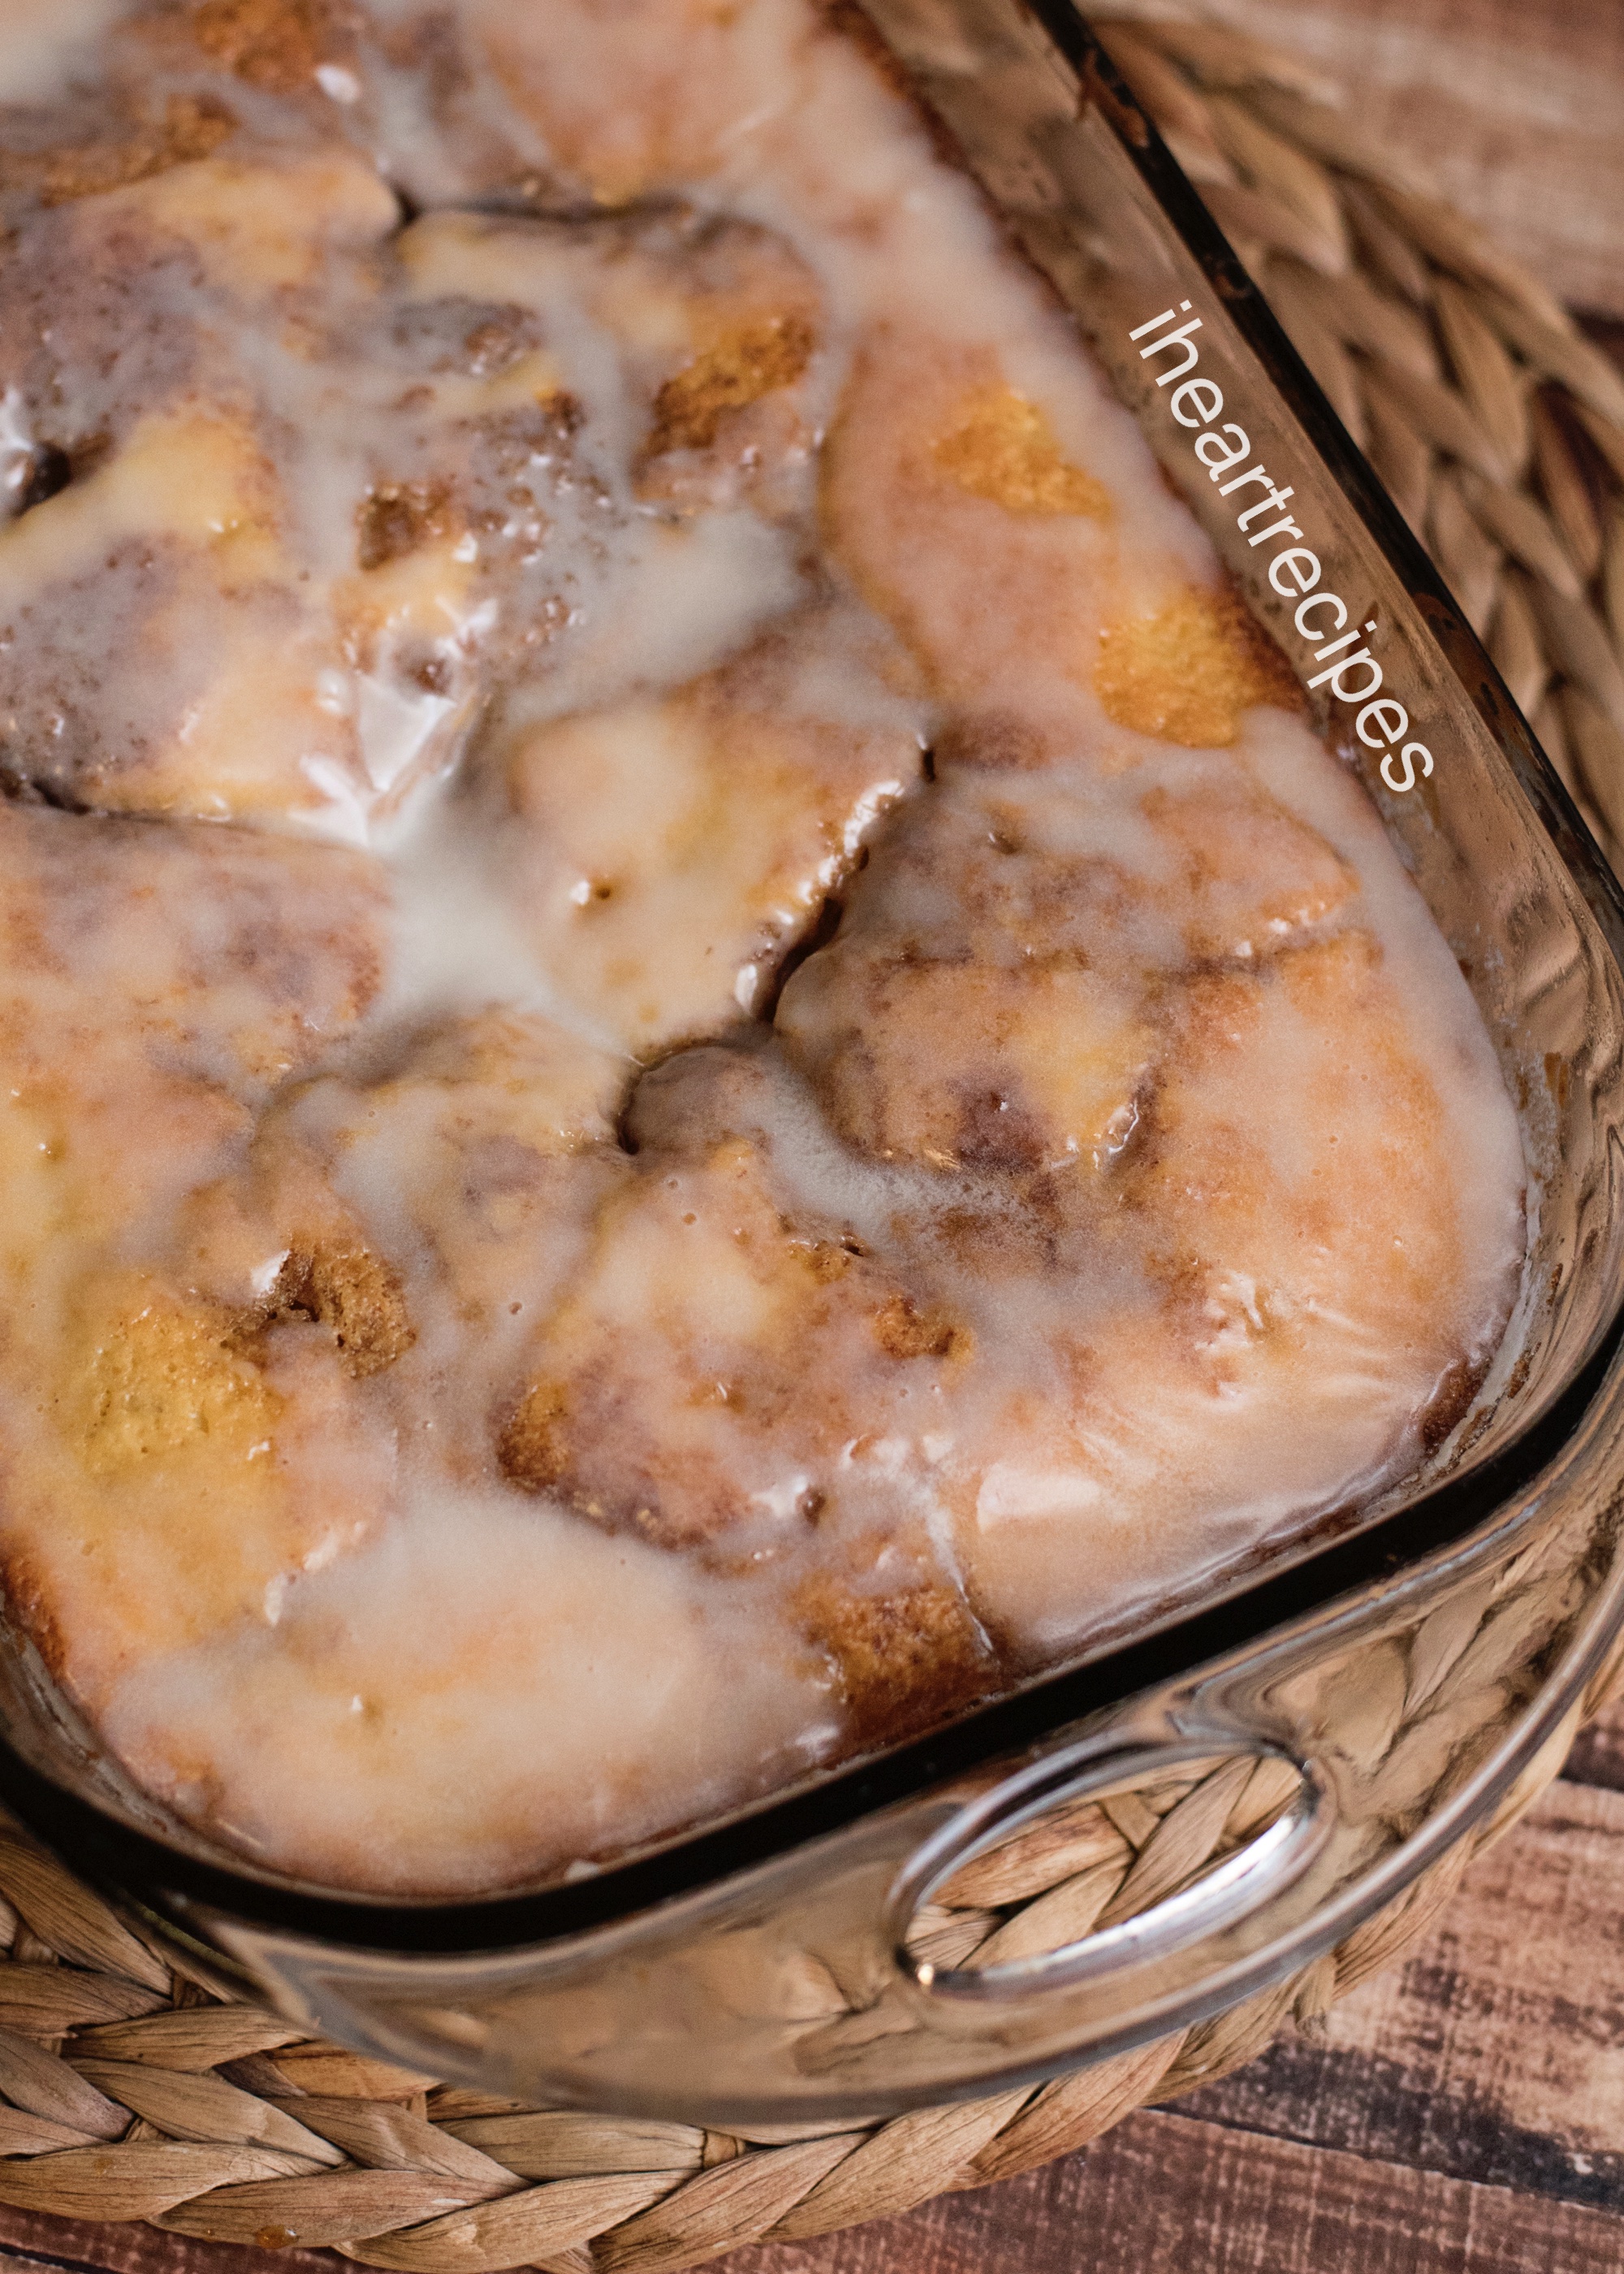 A closeup image of a freshly baked honeybun cake, topped with a sweet vanilla glaze, in a glass casserole dish.